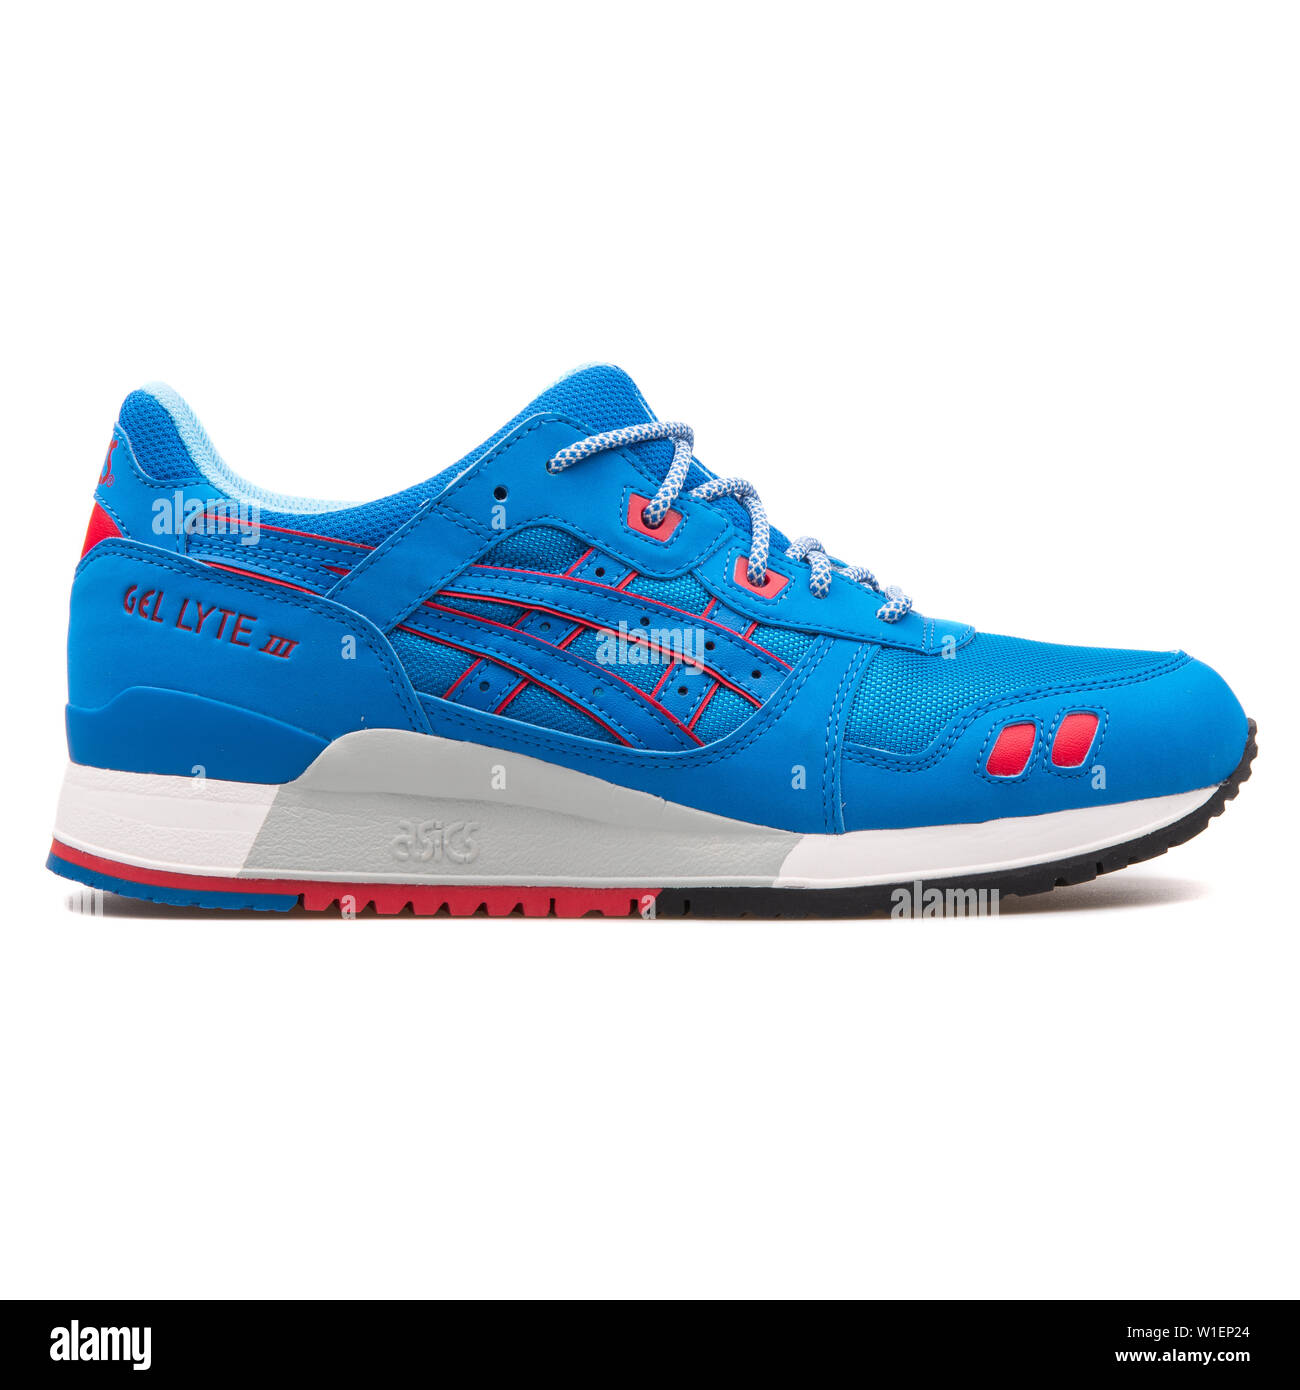 VIENNA, AUSTRIA - AUGUST 10, 2017: Asics Gel Lyte 3 blue and red sneaker on  white background Stock Photo - Alamy